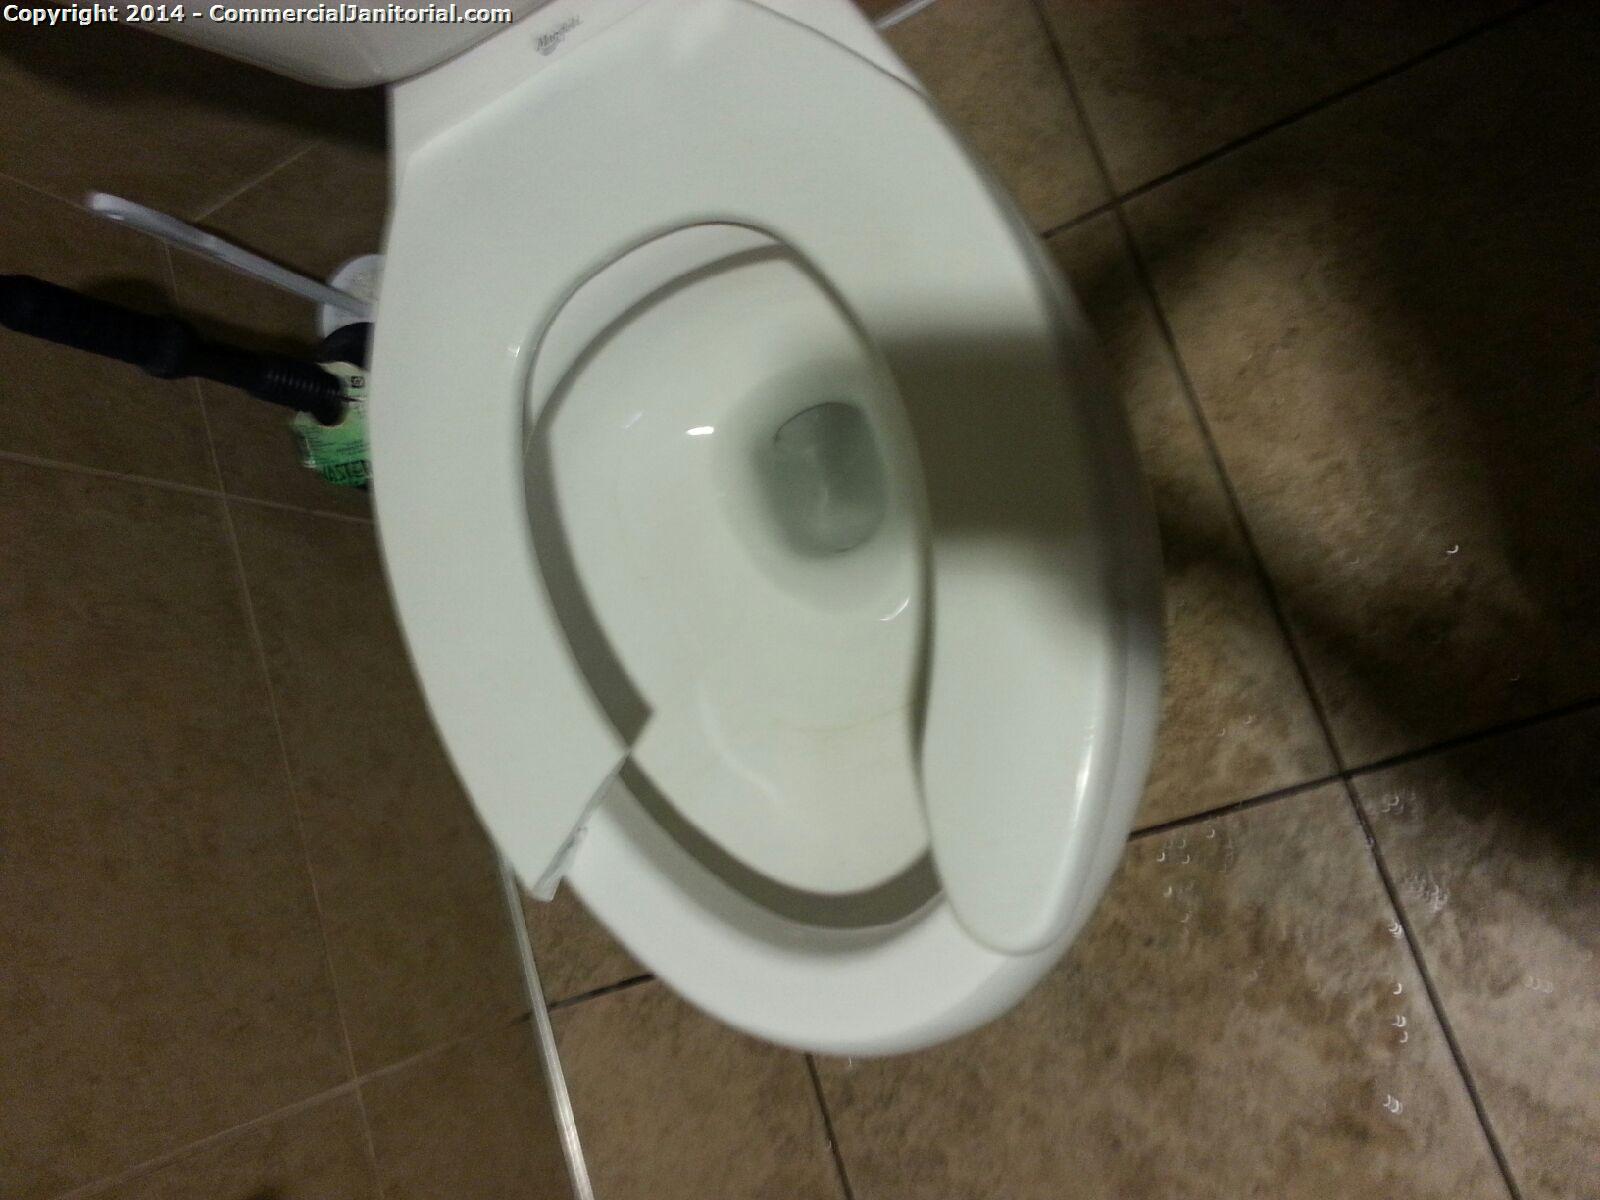 Ralph checking in.

Here is a photo of the broken toilet sea.  

Running to the store and will return to fix this toilet seat.

Ralph. T.